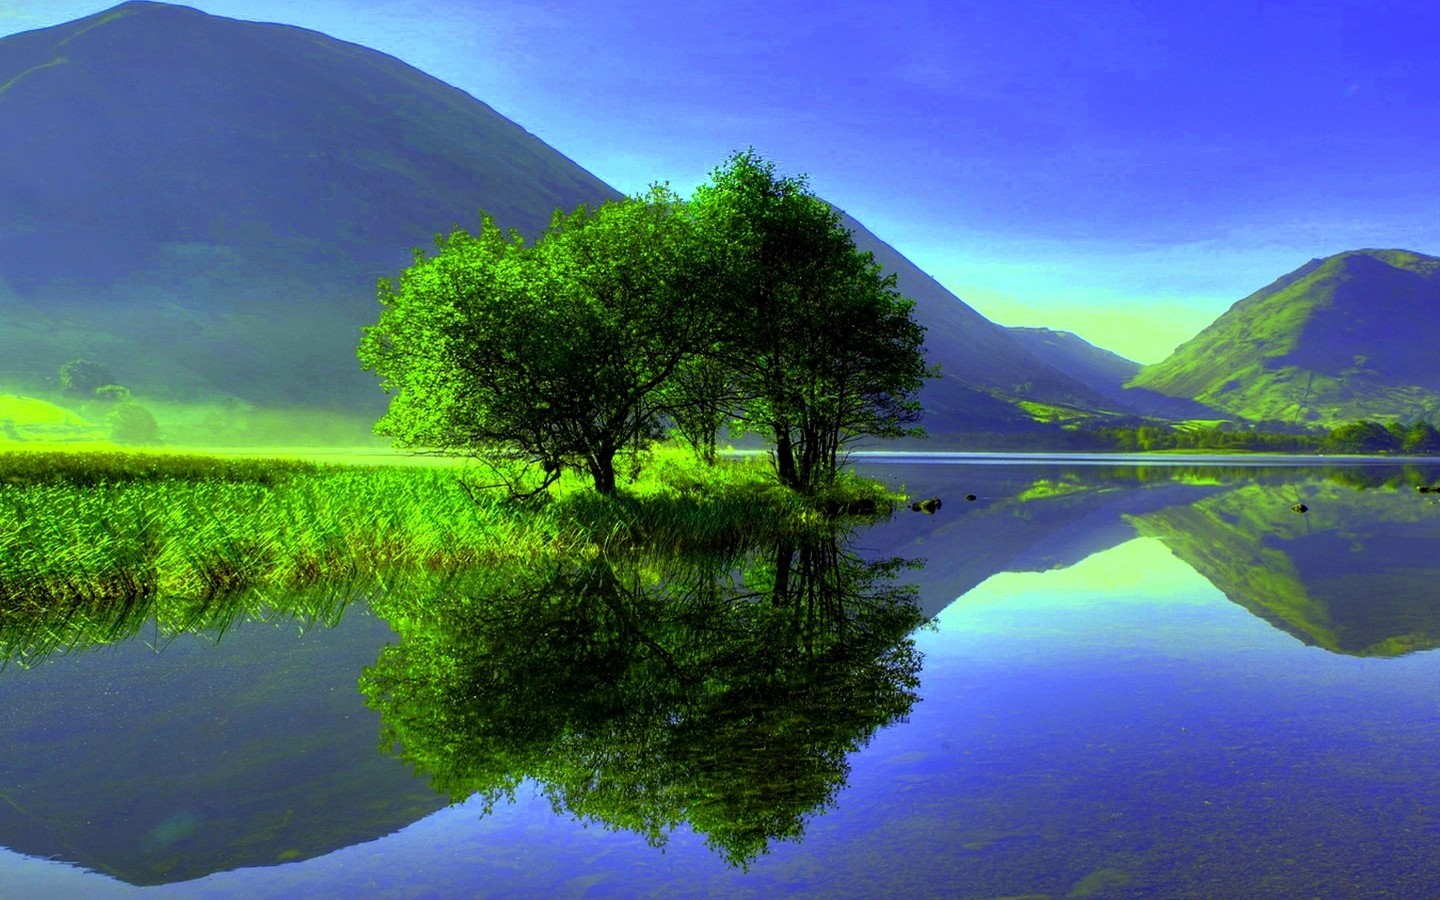 General 1440x900 artwork nature mountains trees reflection clear sky sky landscape